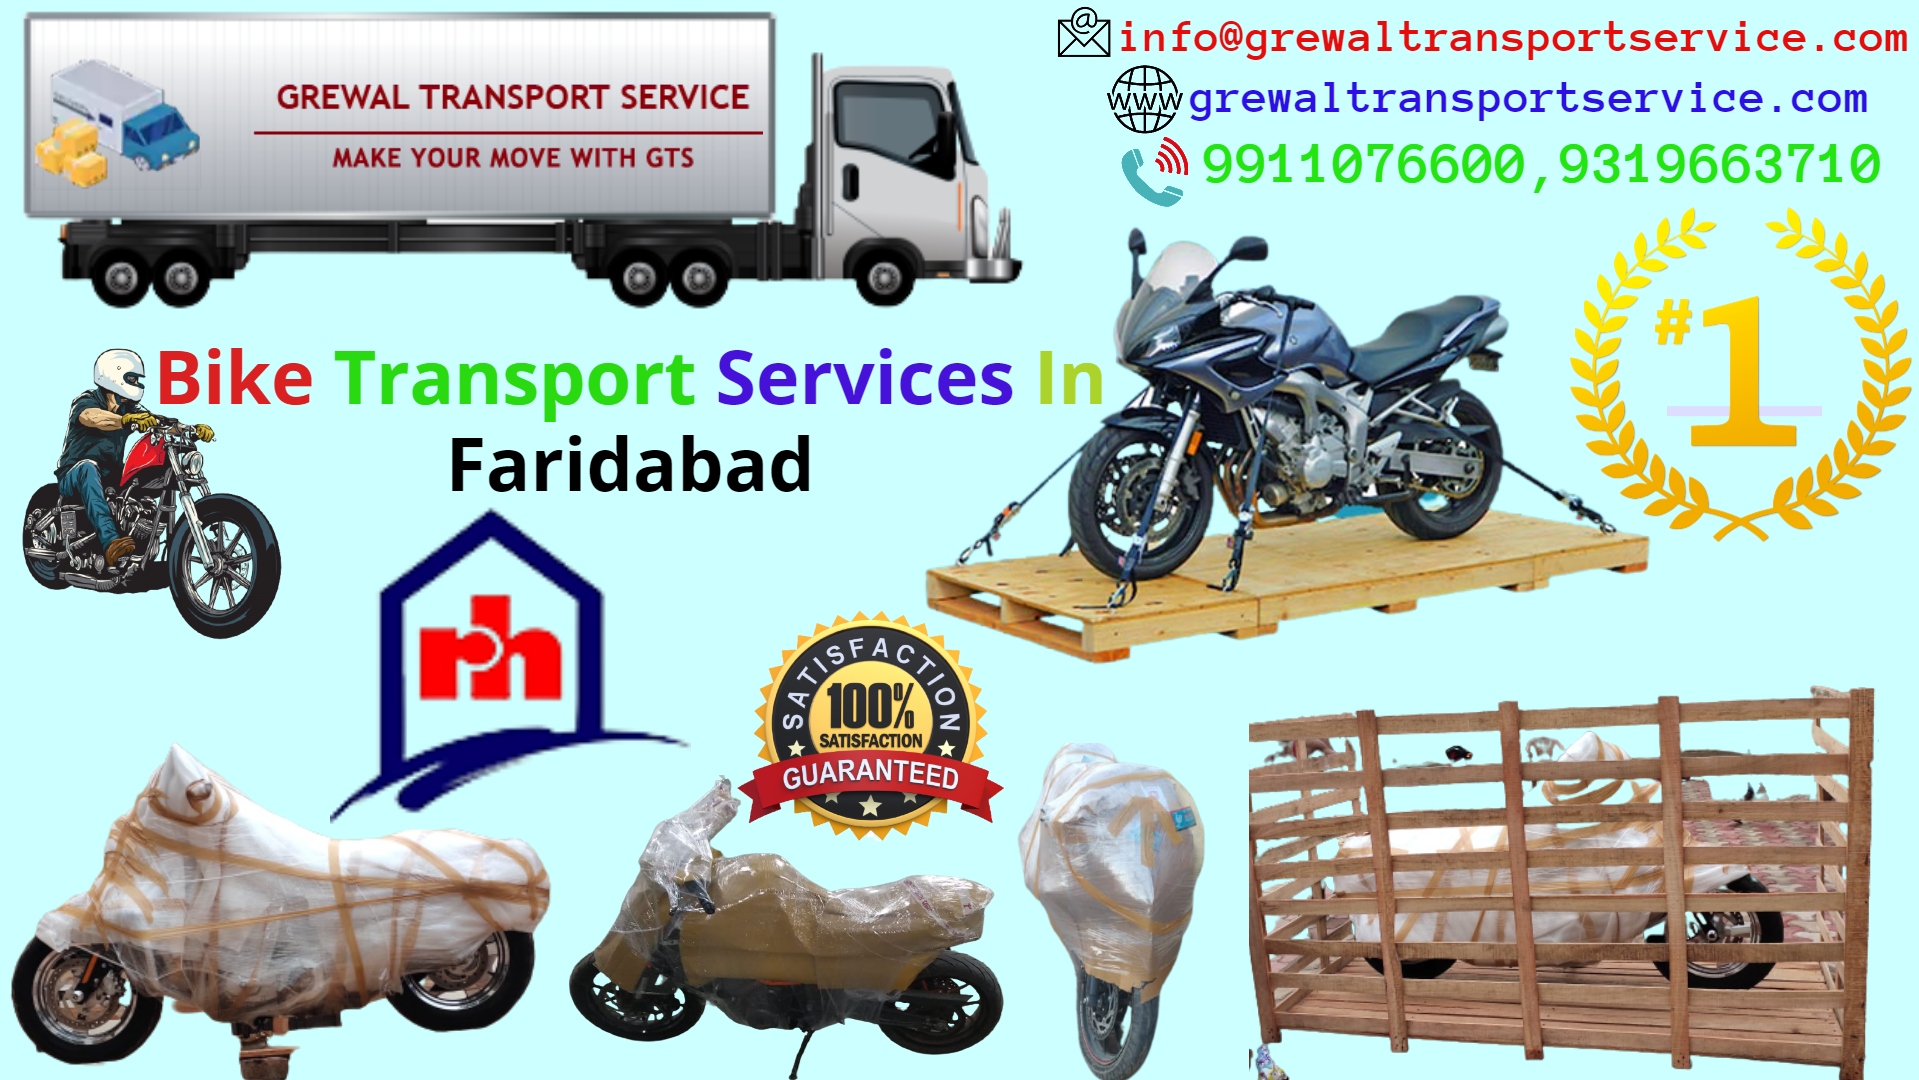 Bike transport services in Faridabad | Grewal charges